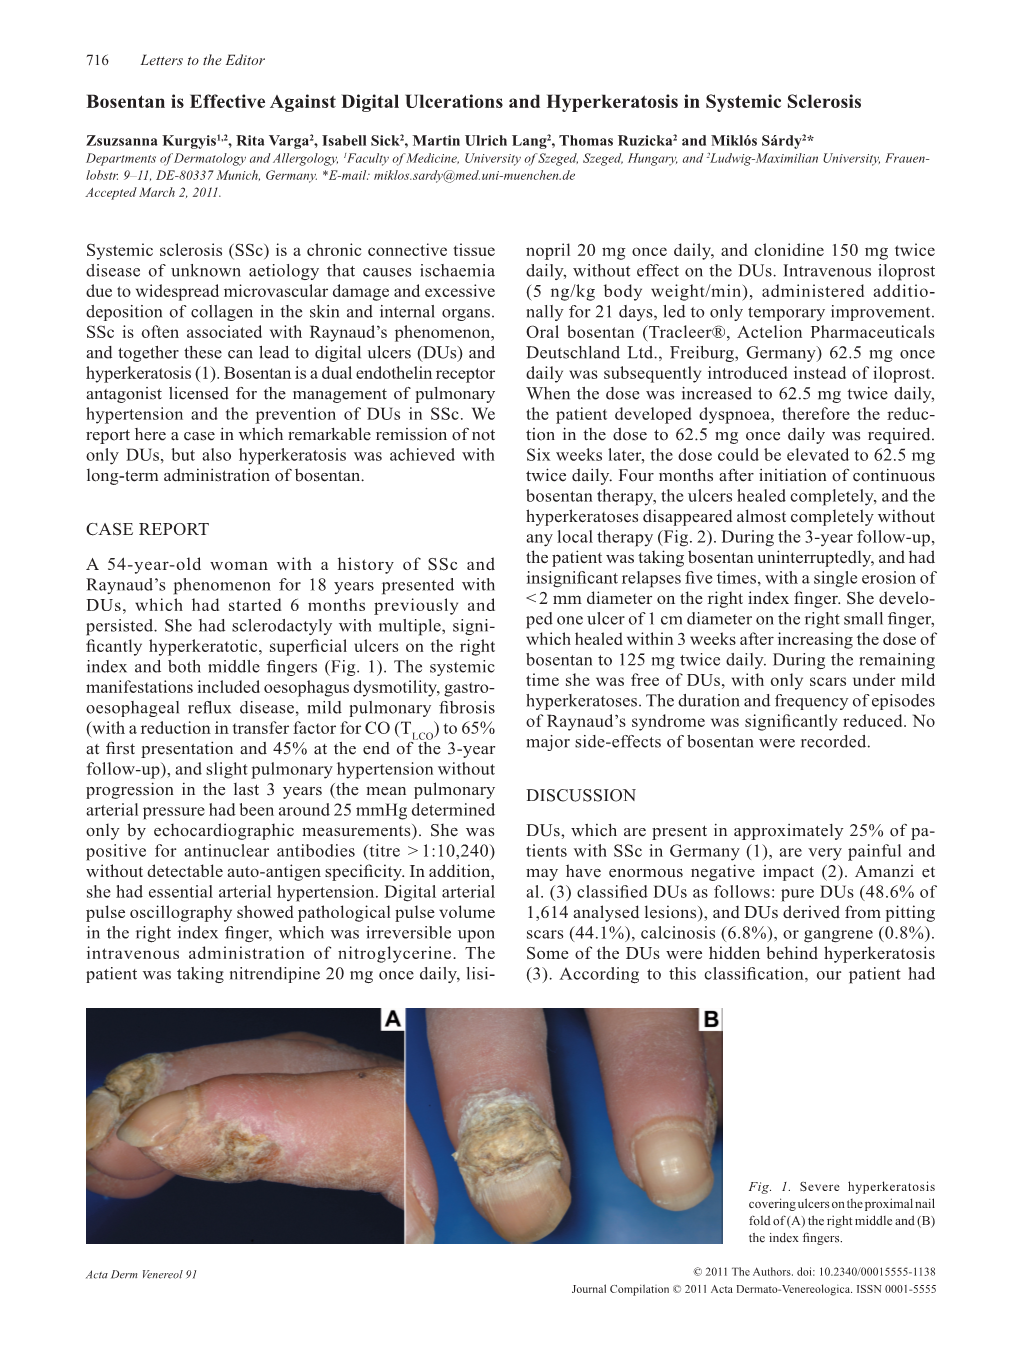 Bosentan Is Effective Against Digital Ulcerations and Hyperkeratosis in Systemic Sclerosis